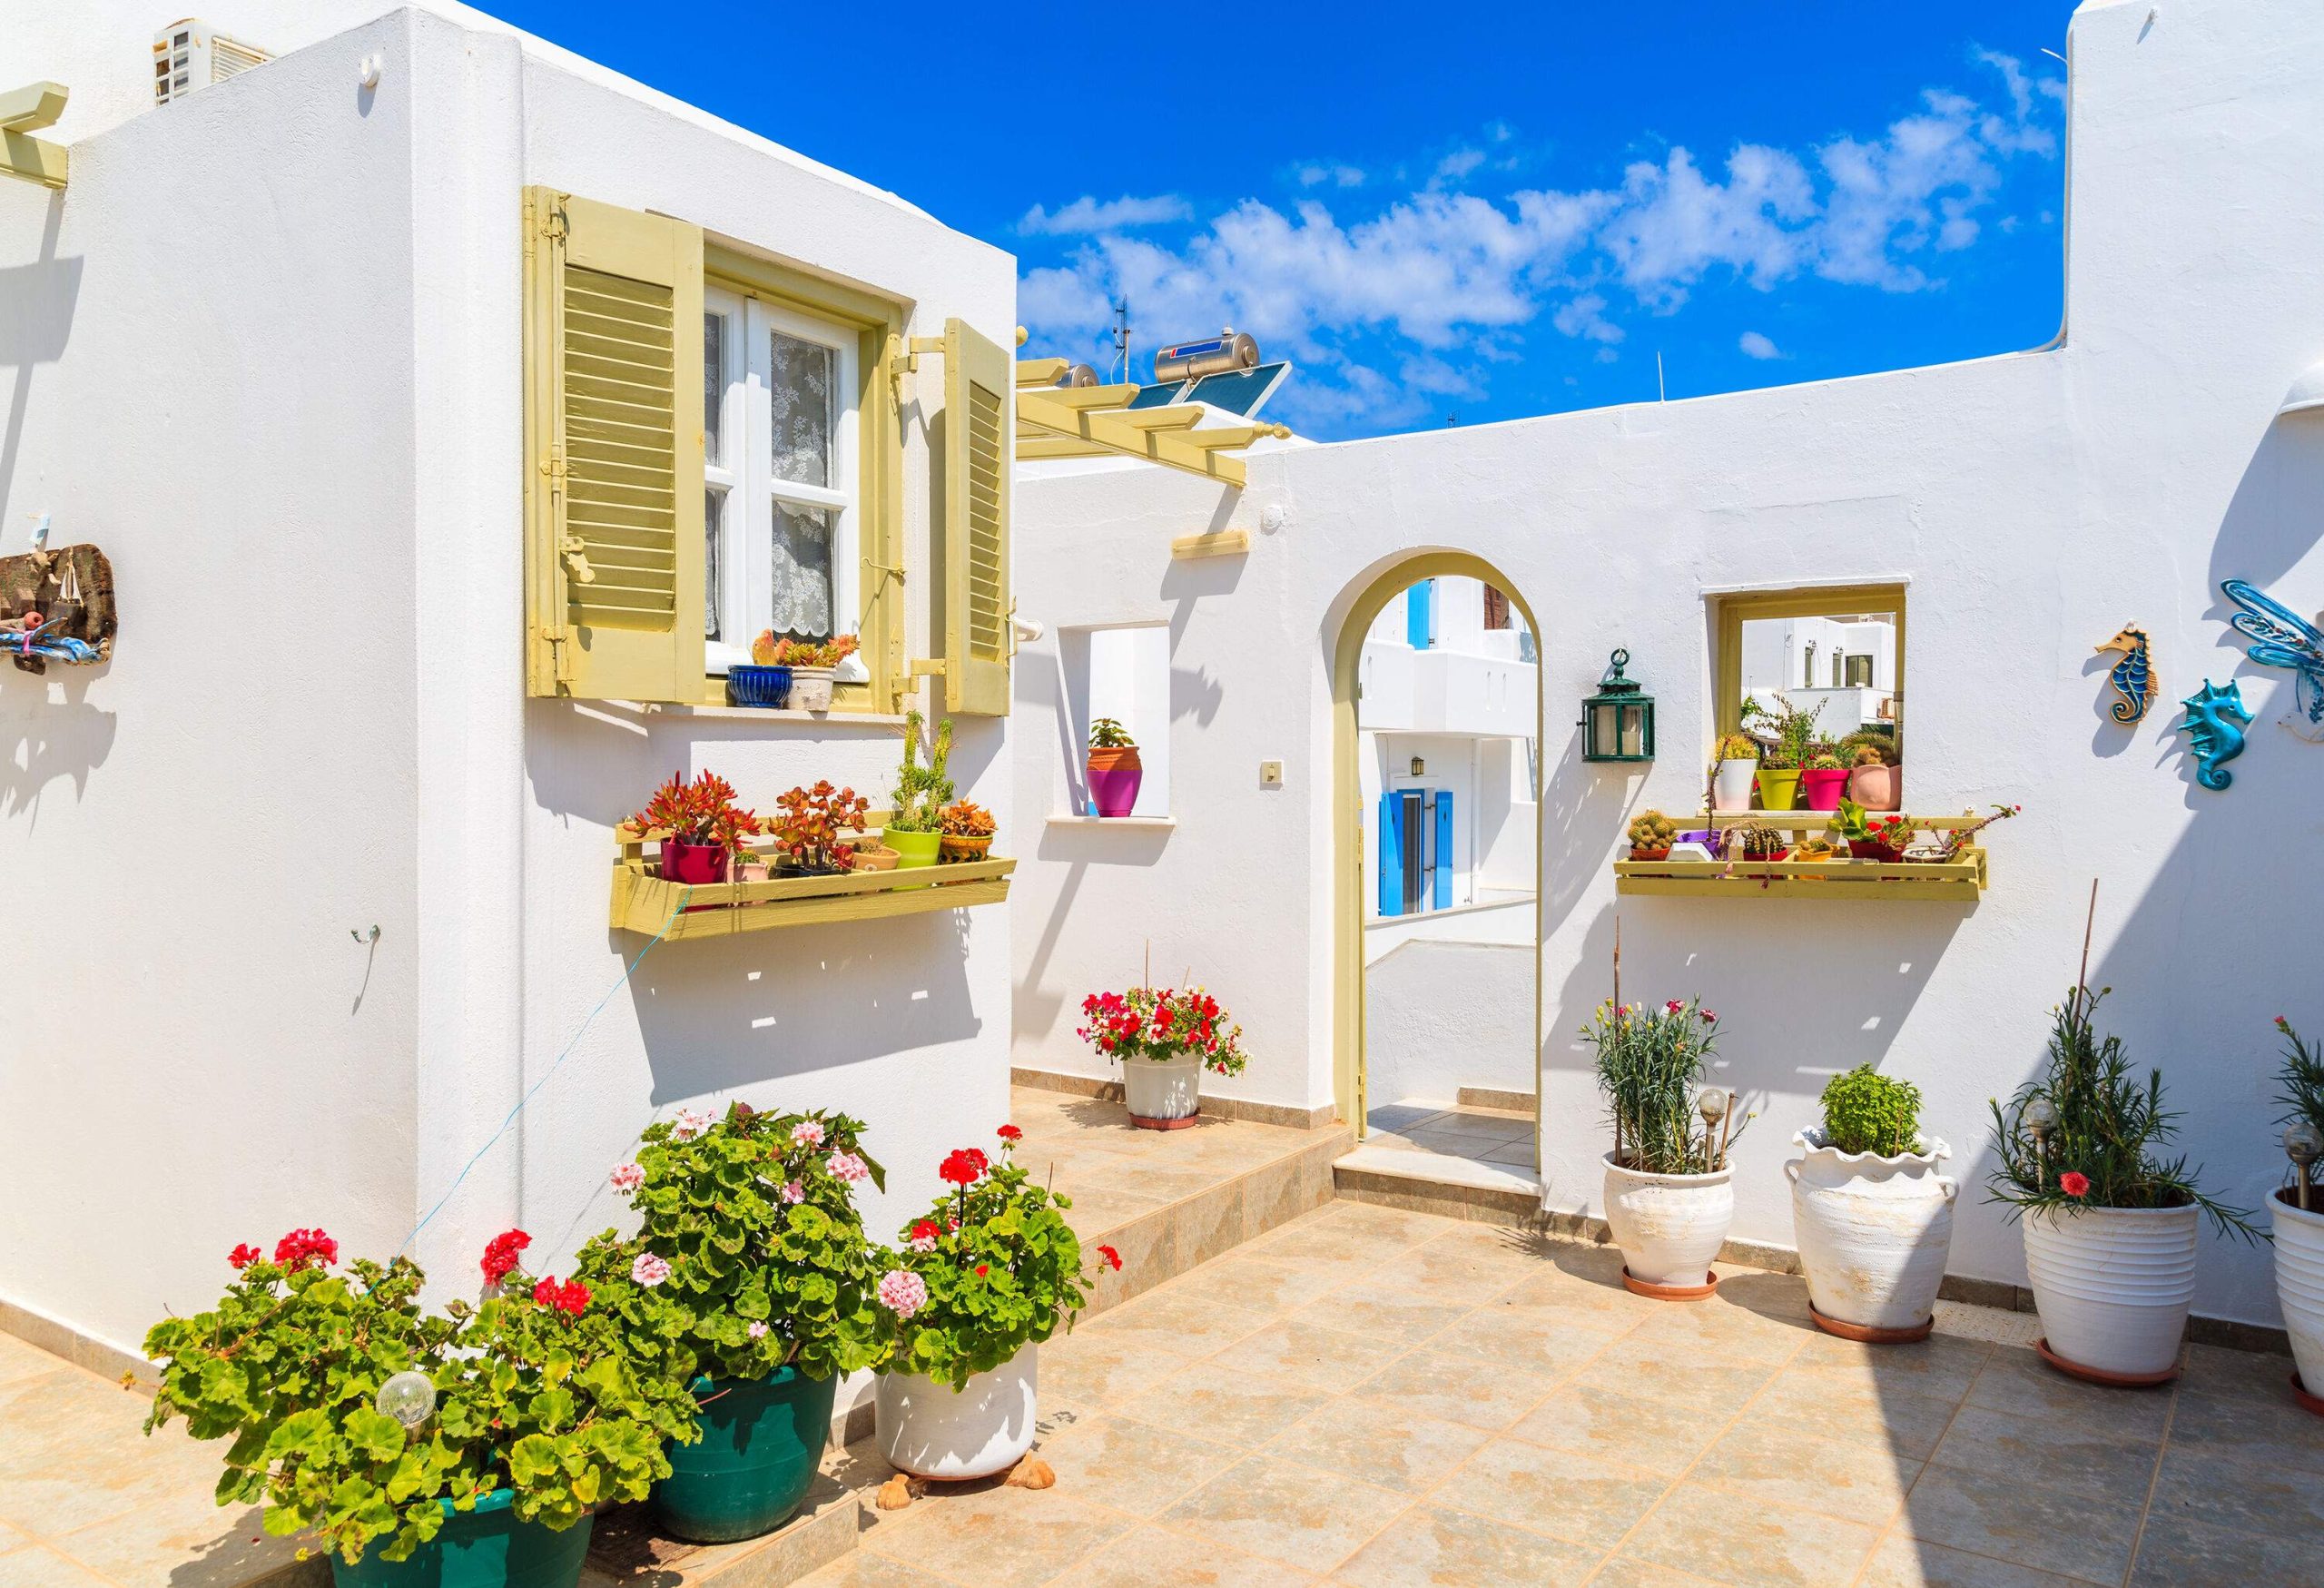 A charming white villa with a patio adorned with potted plants and coastal wall décor.